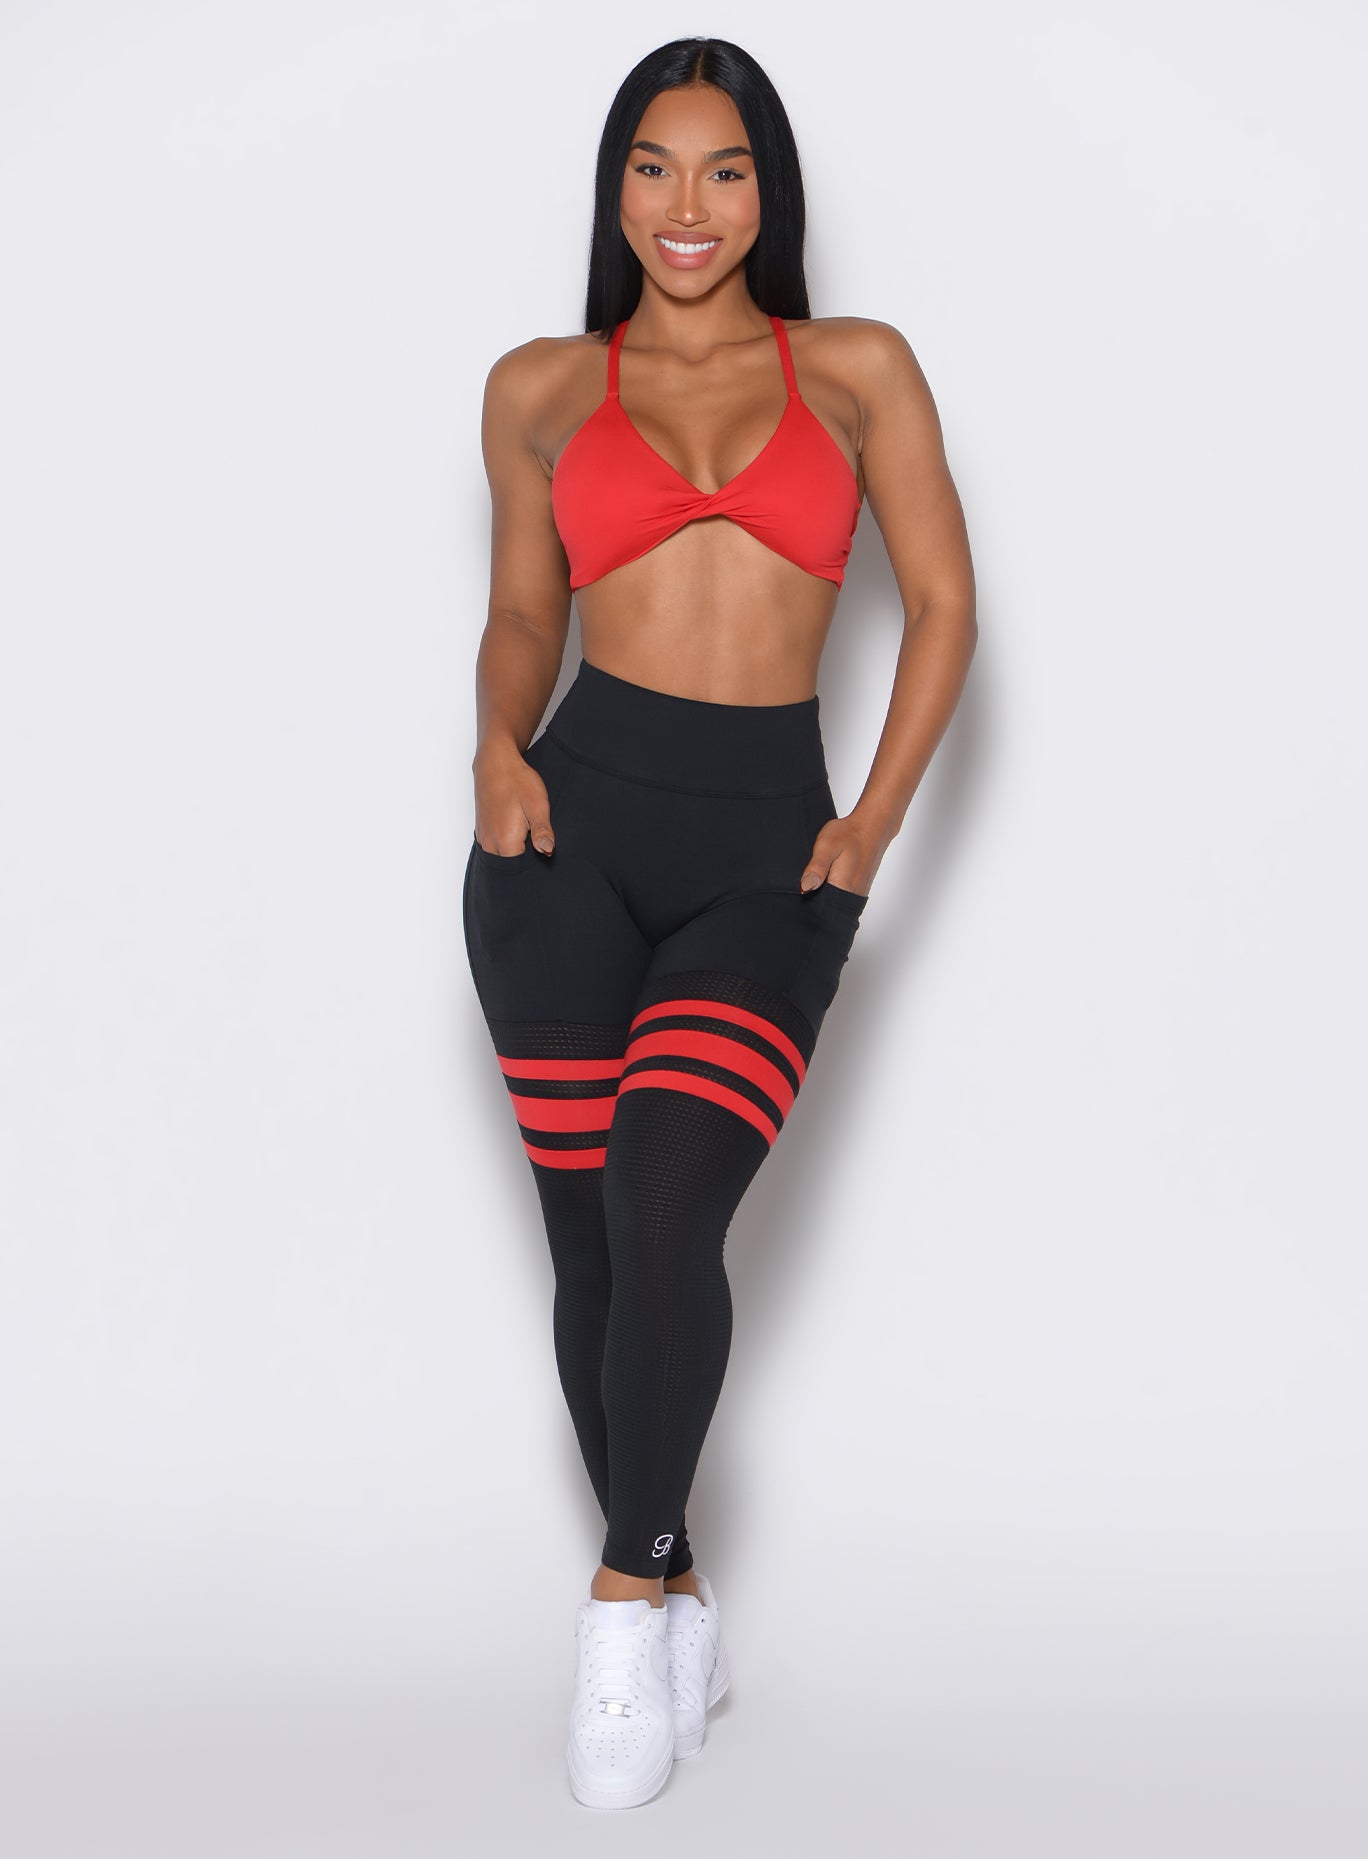 Front profile view of a model wearing the Scrunch Thigh Highs in Black Fire color along with a red sports bra